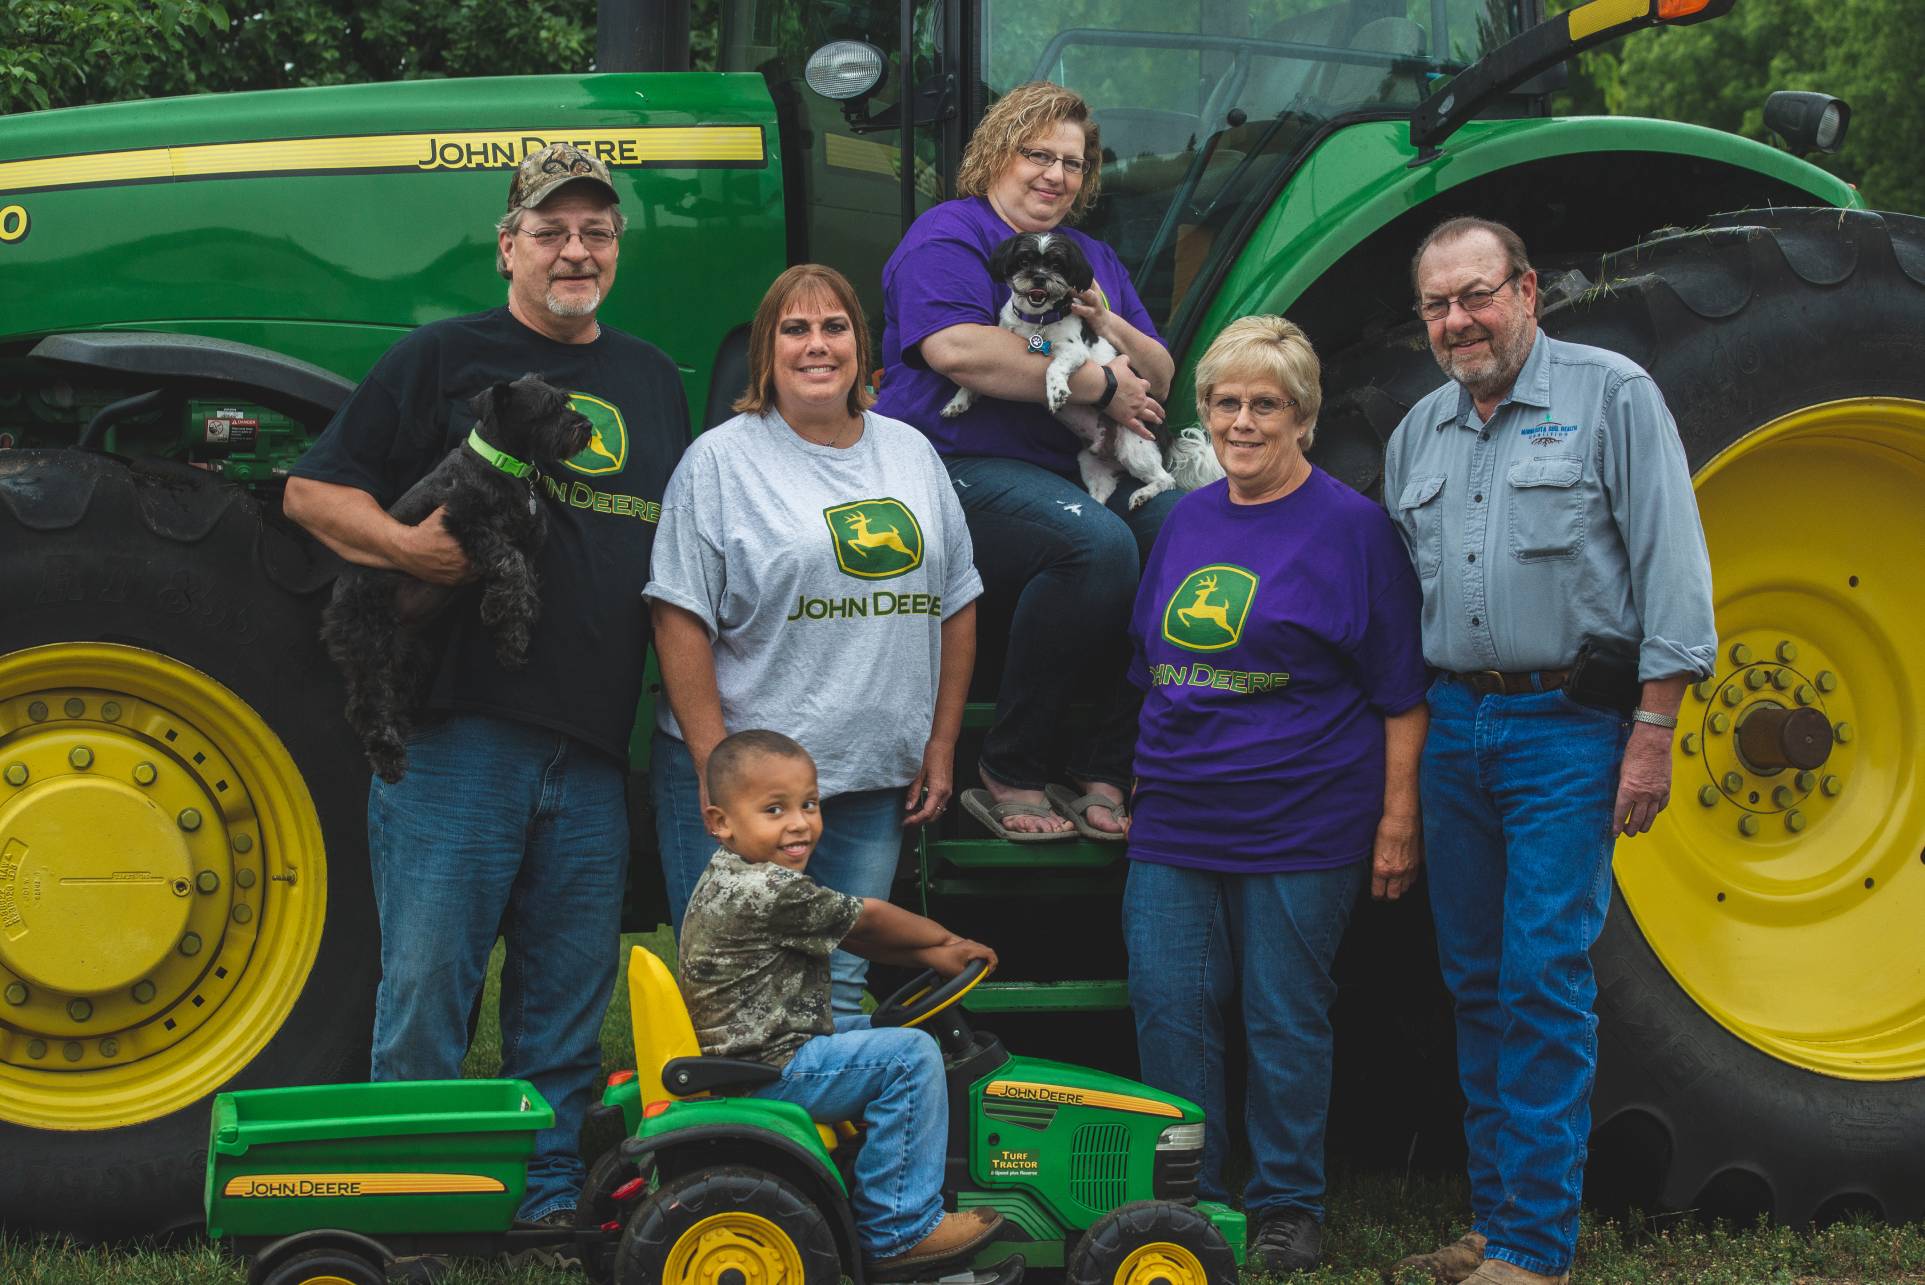 Ackerman family standing together in front of a John Deere tractor.